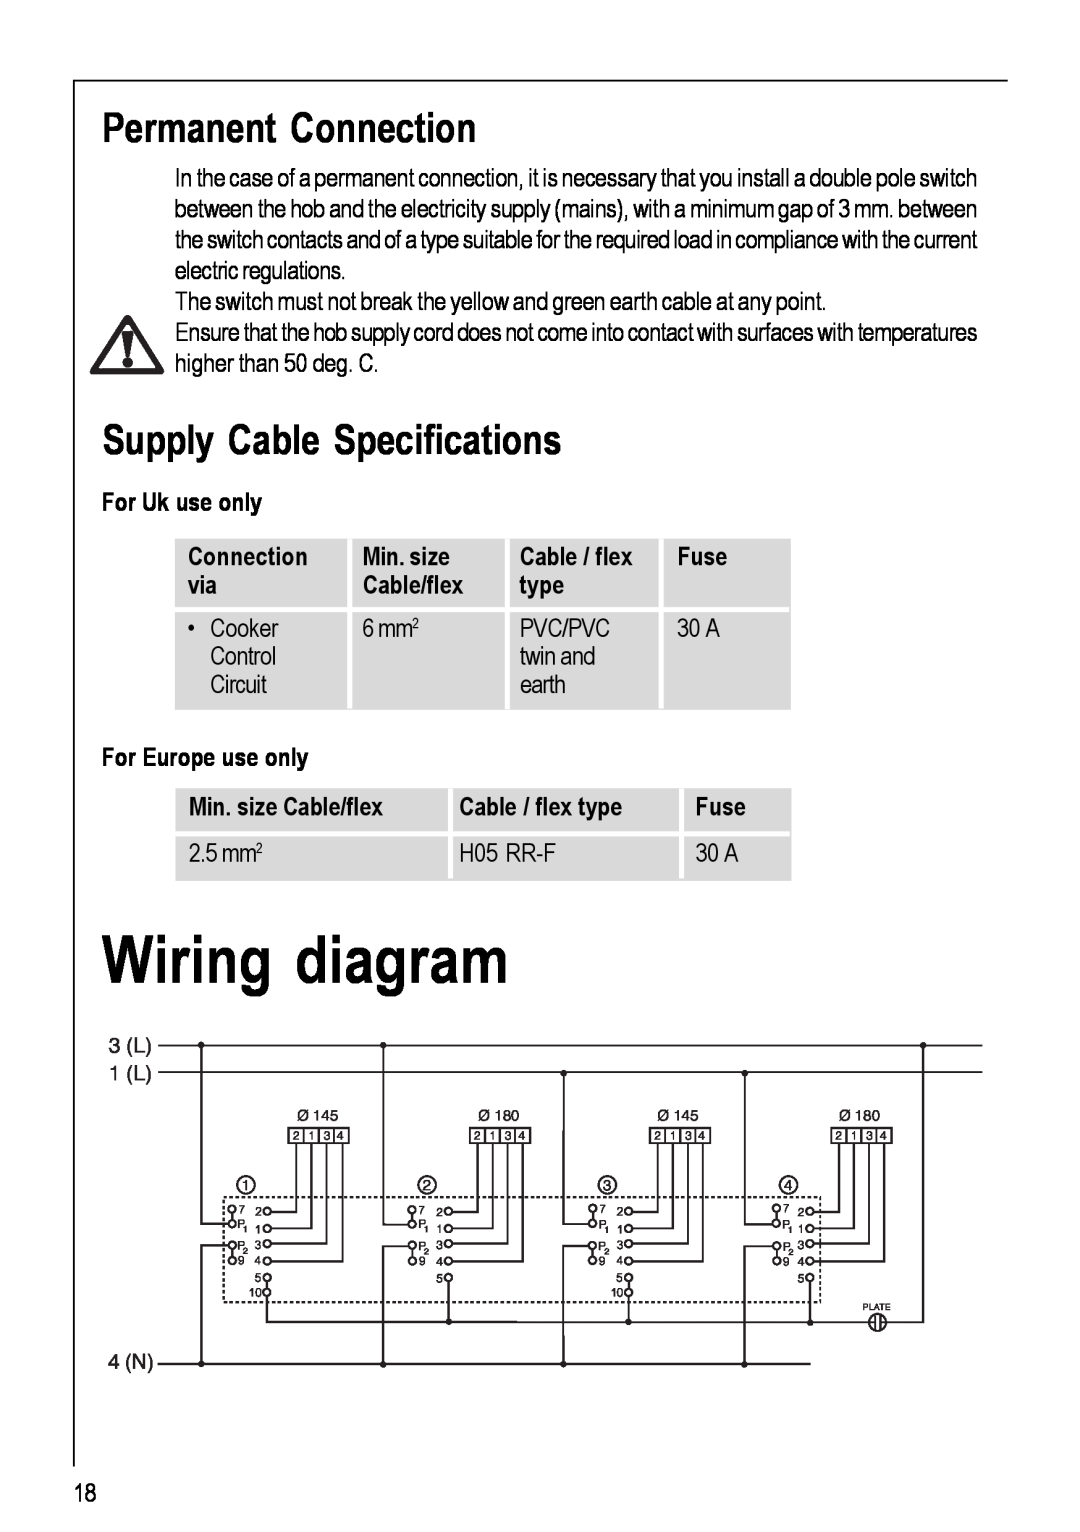 Electrolux 116 K operating instructions Wiring diagram, Permanent Connection, Supply Cable Specifications 